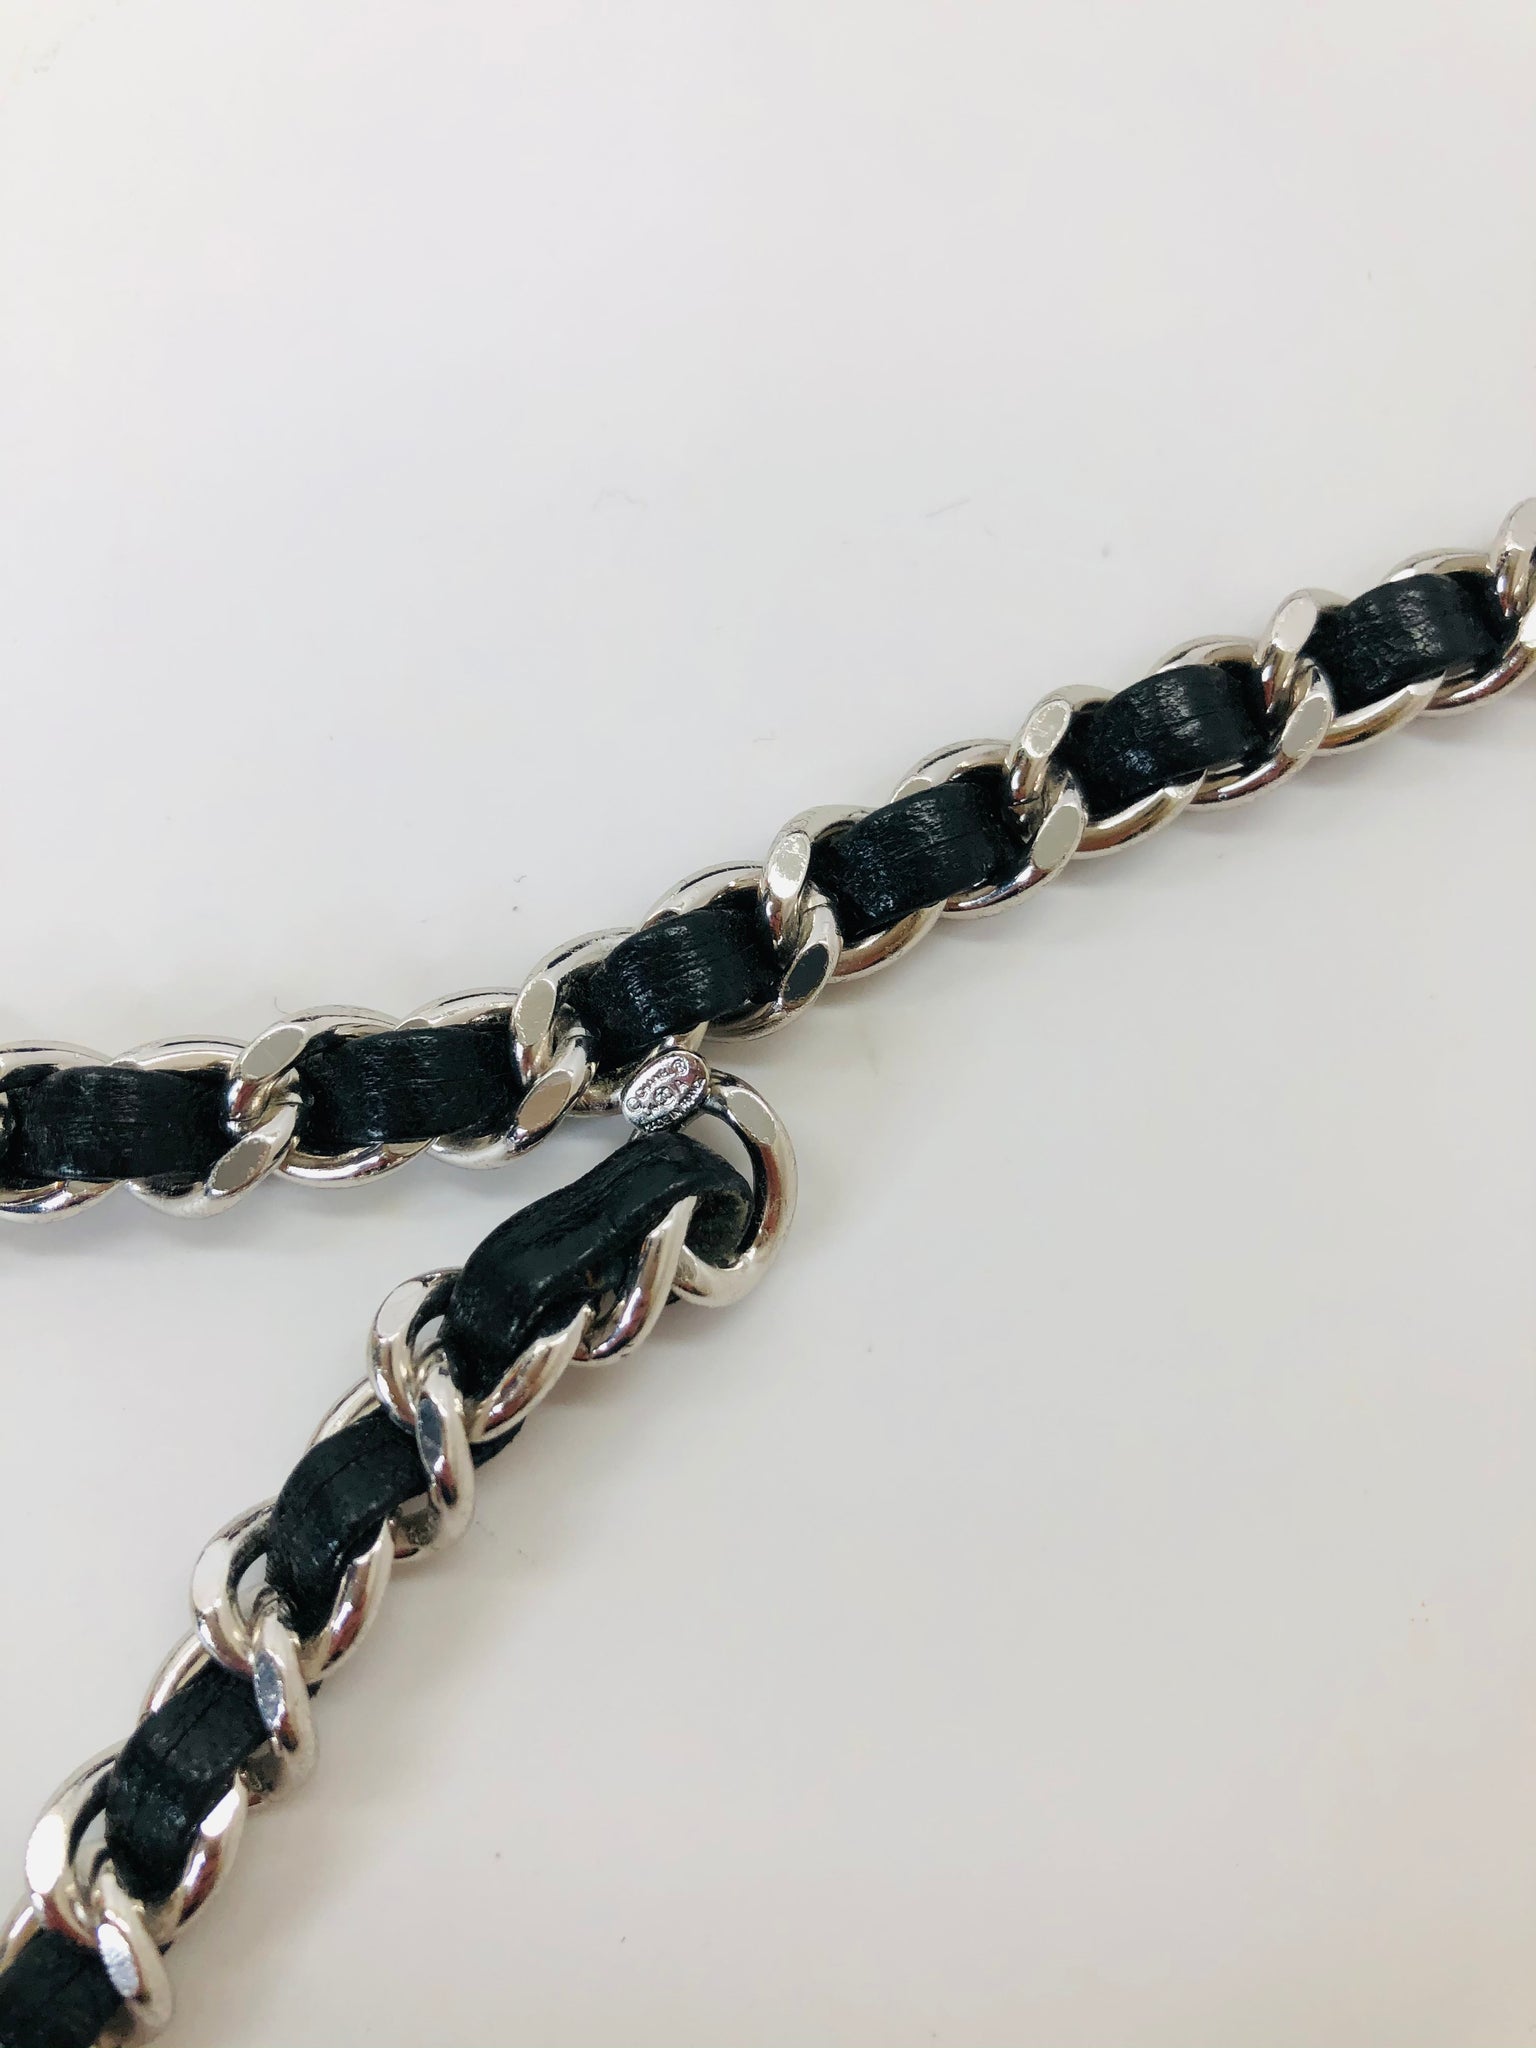 CHANEL Silver and Black Leather Chain Belt Size Small – JDEX Styles